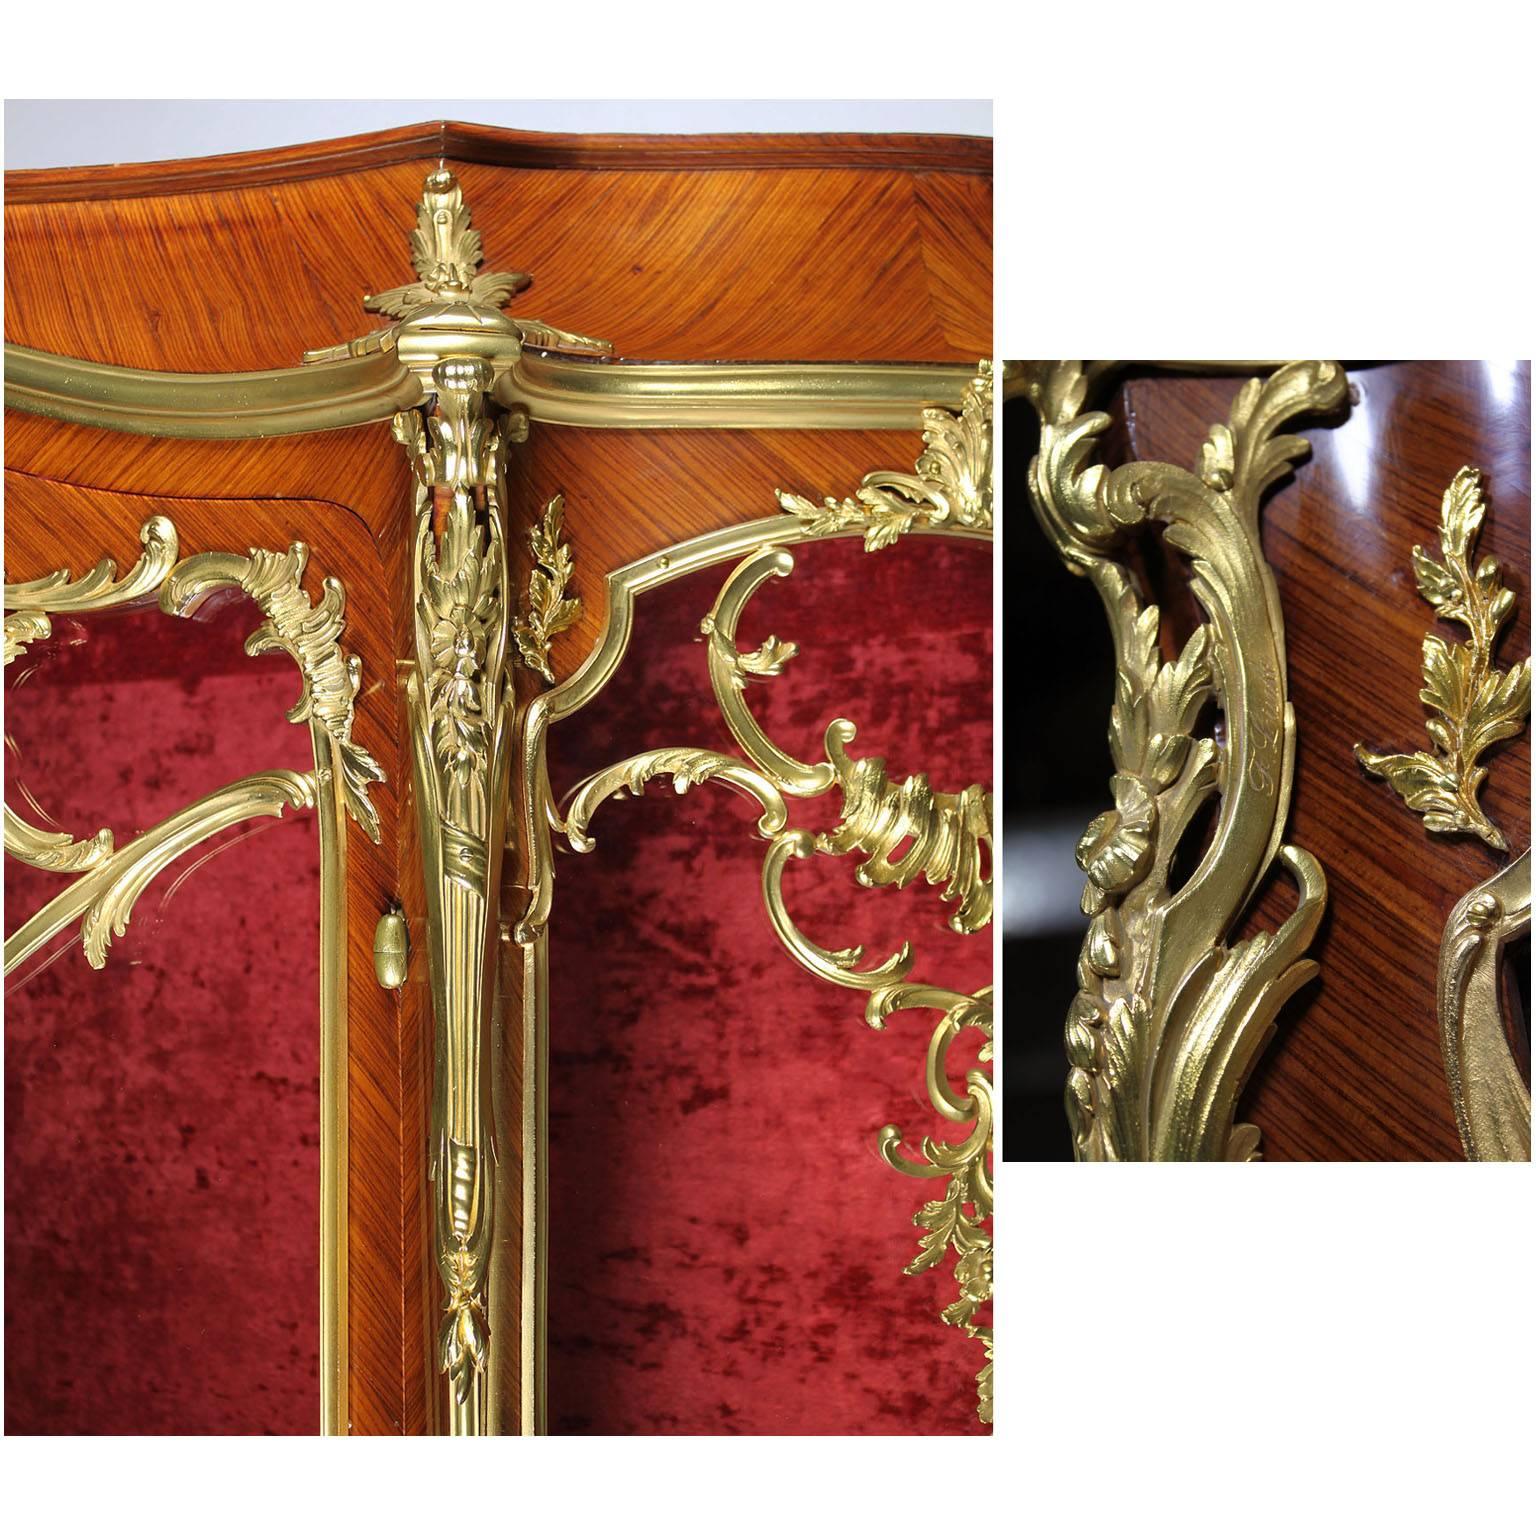 French 19th-20th Century Louis XV Style Kingwood and Ormolu Mounted Vitrine For Sale 4